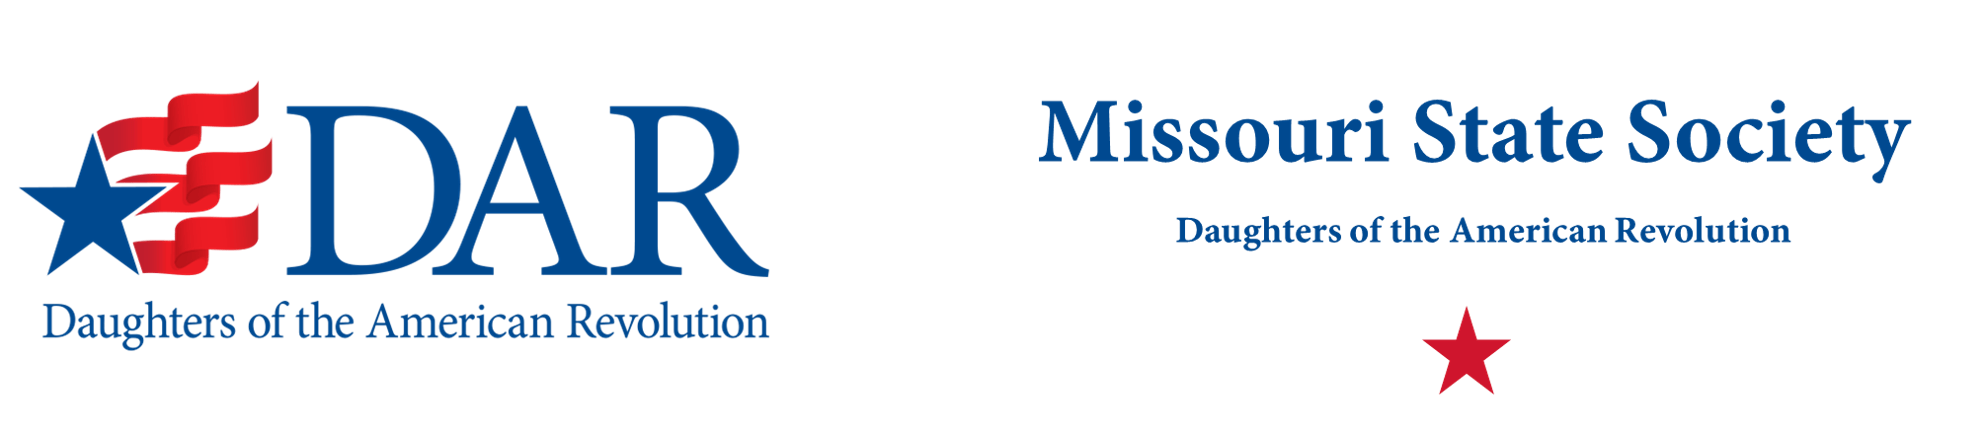 Missouri State Society Daughters of the American Revolution